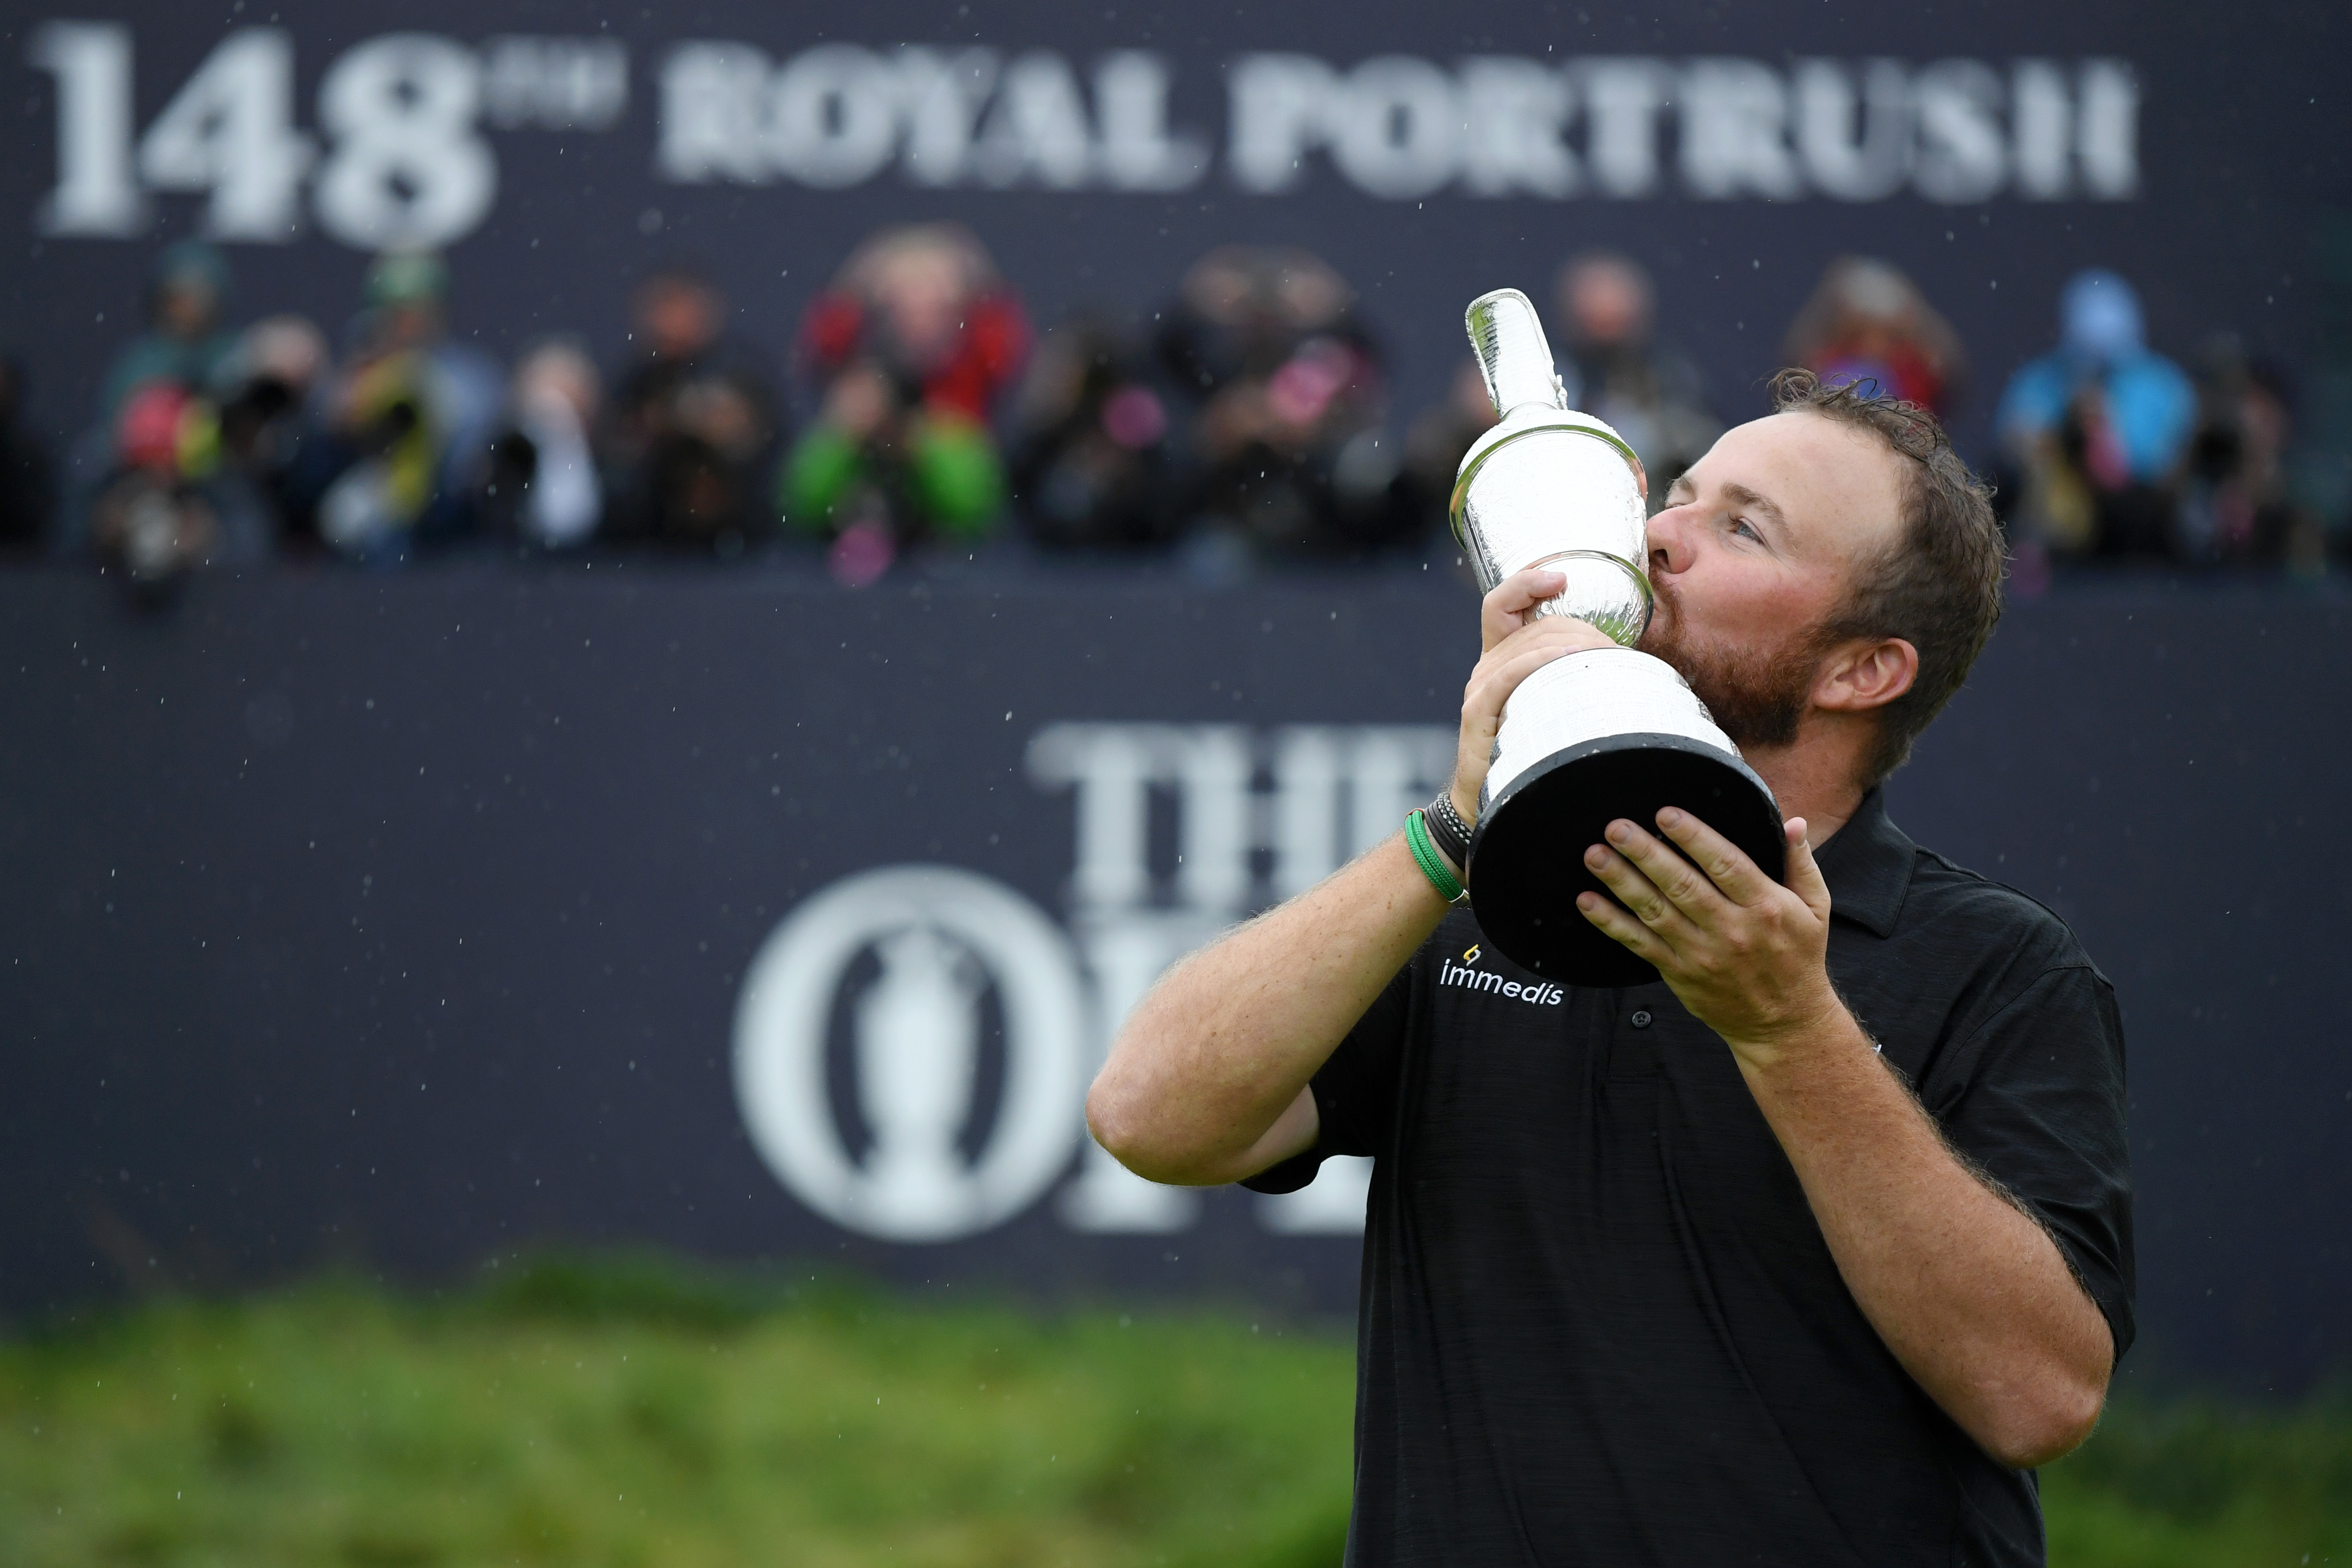 Shane Lowry Takes Home the Claret Jug to the Emerald Isle at the 148th Open Championship